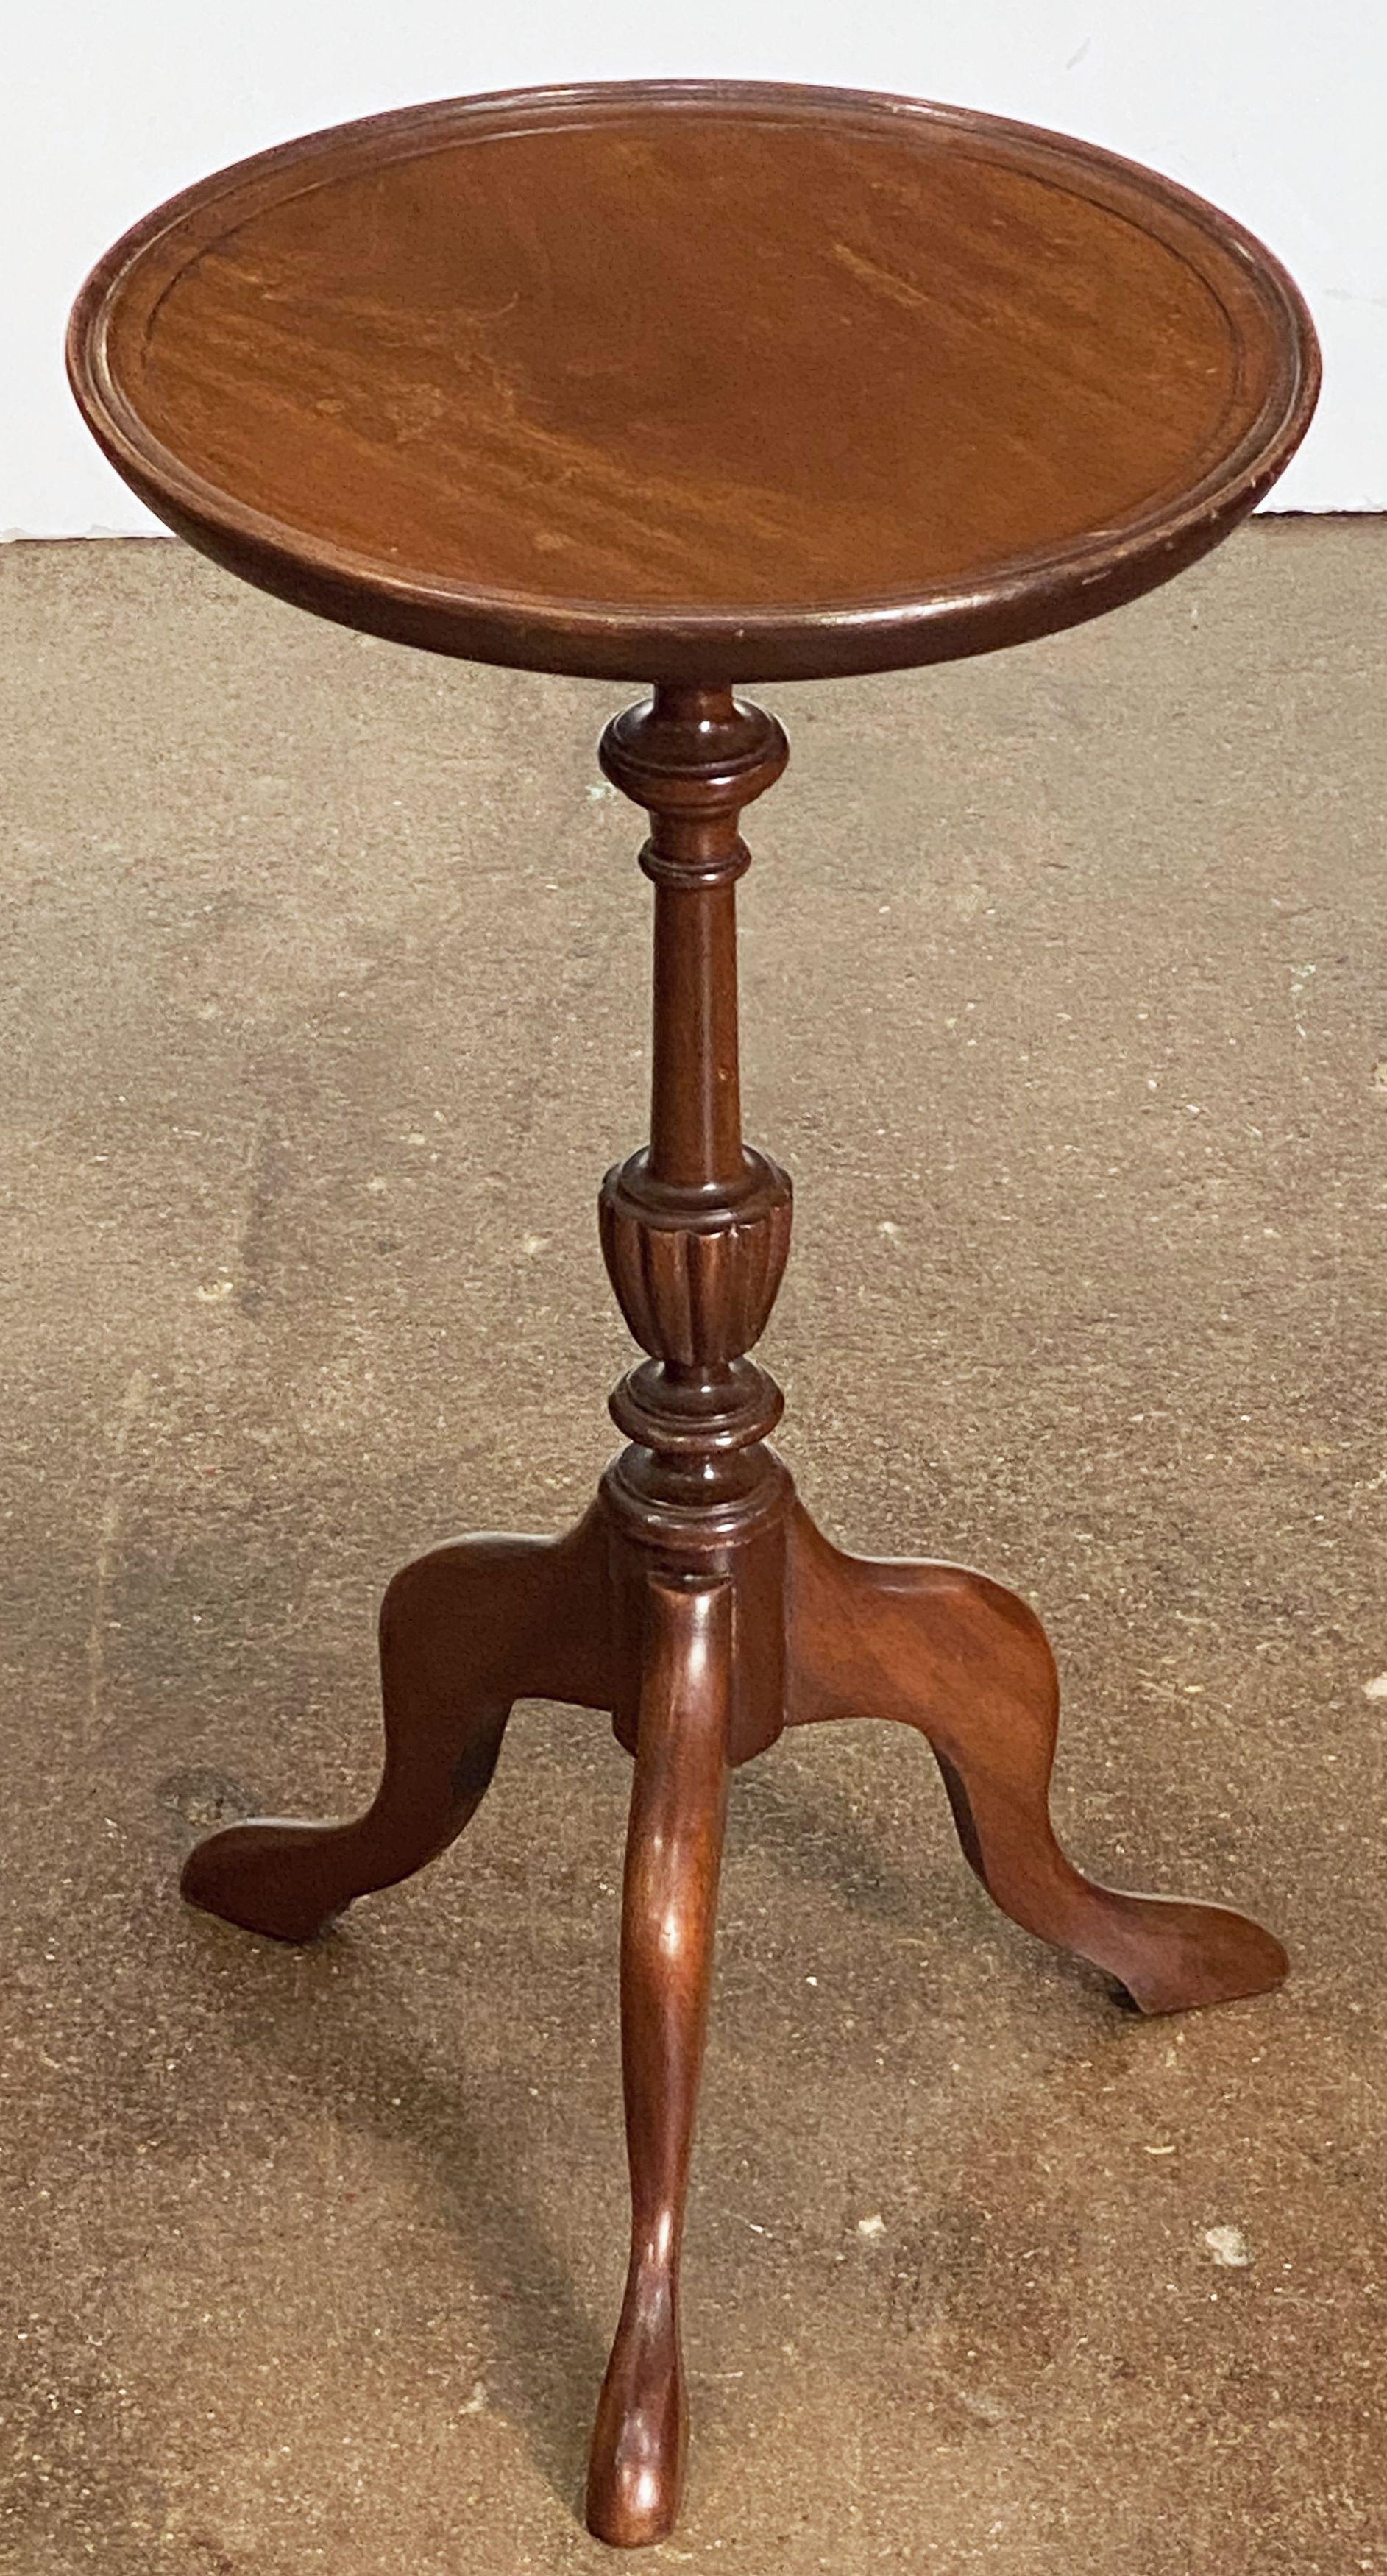 An English wine table of mahogany from the early 20th century, featuring a raised edge around the circumference of the round, moulded top, mounted upon a turned column pedestal with tripod base.

An excellent choice as a side table or for